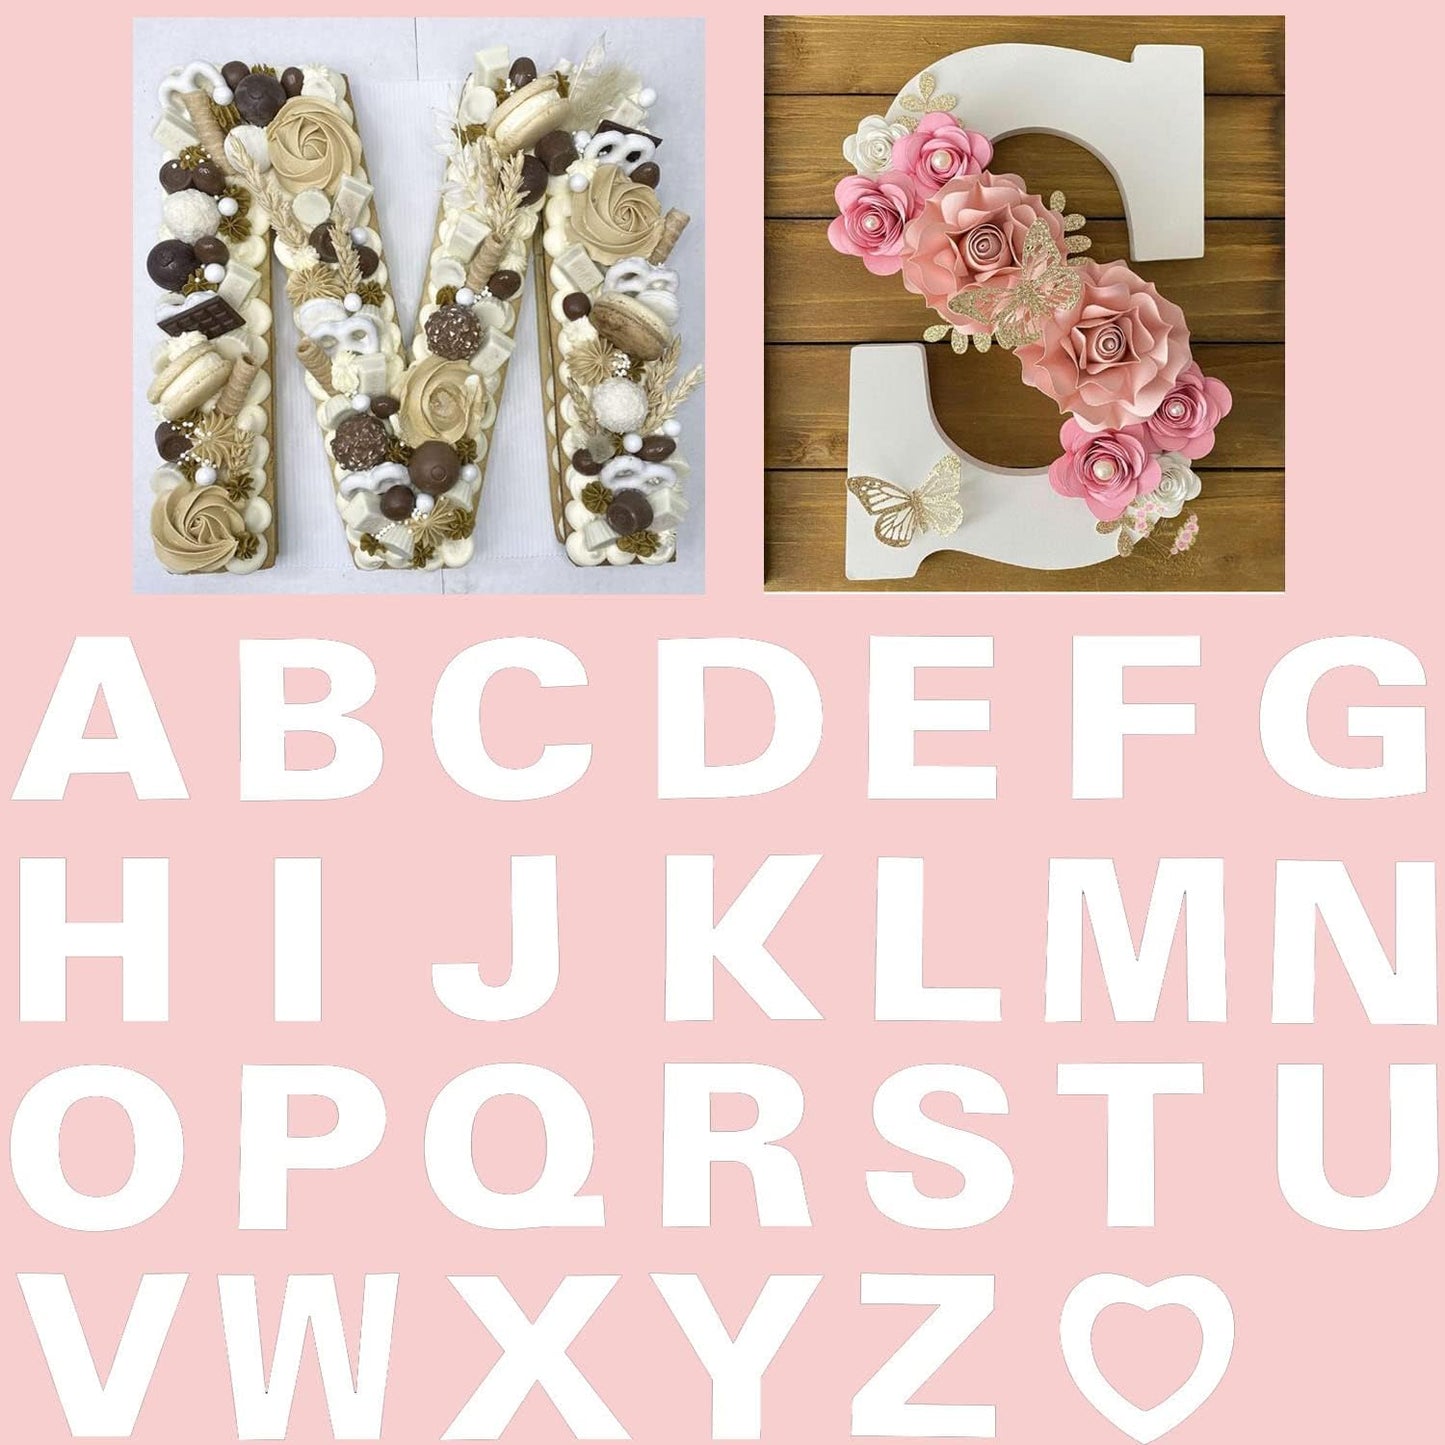 A to Z Alphabet Letter Cake Stencils -12 inches (Pack of 1)